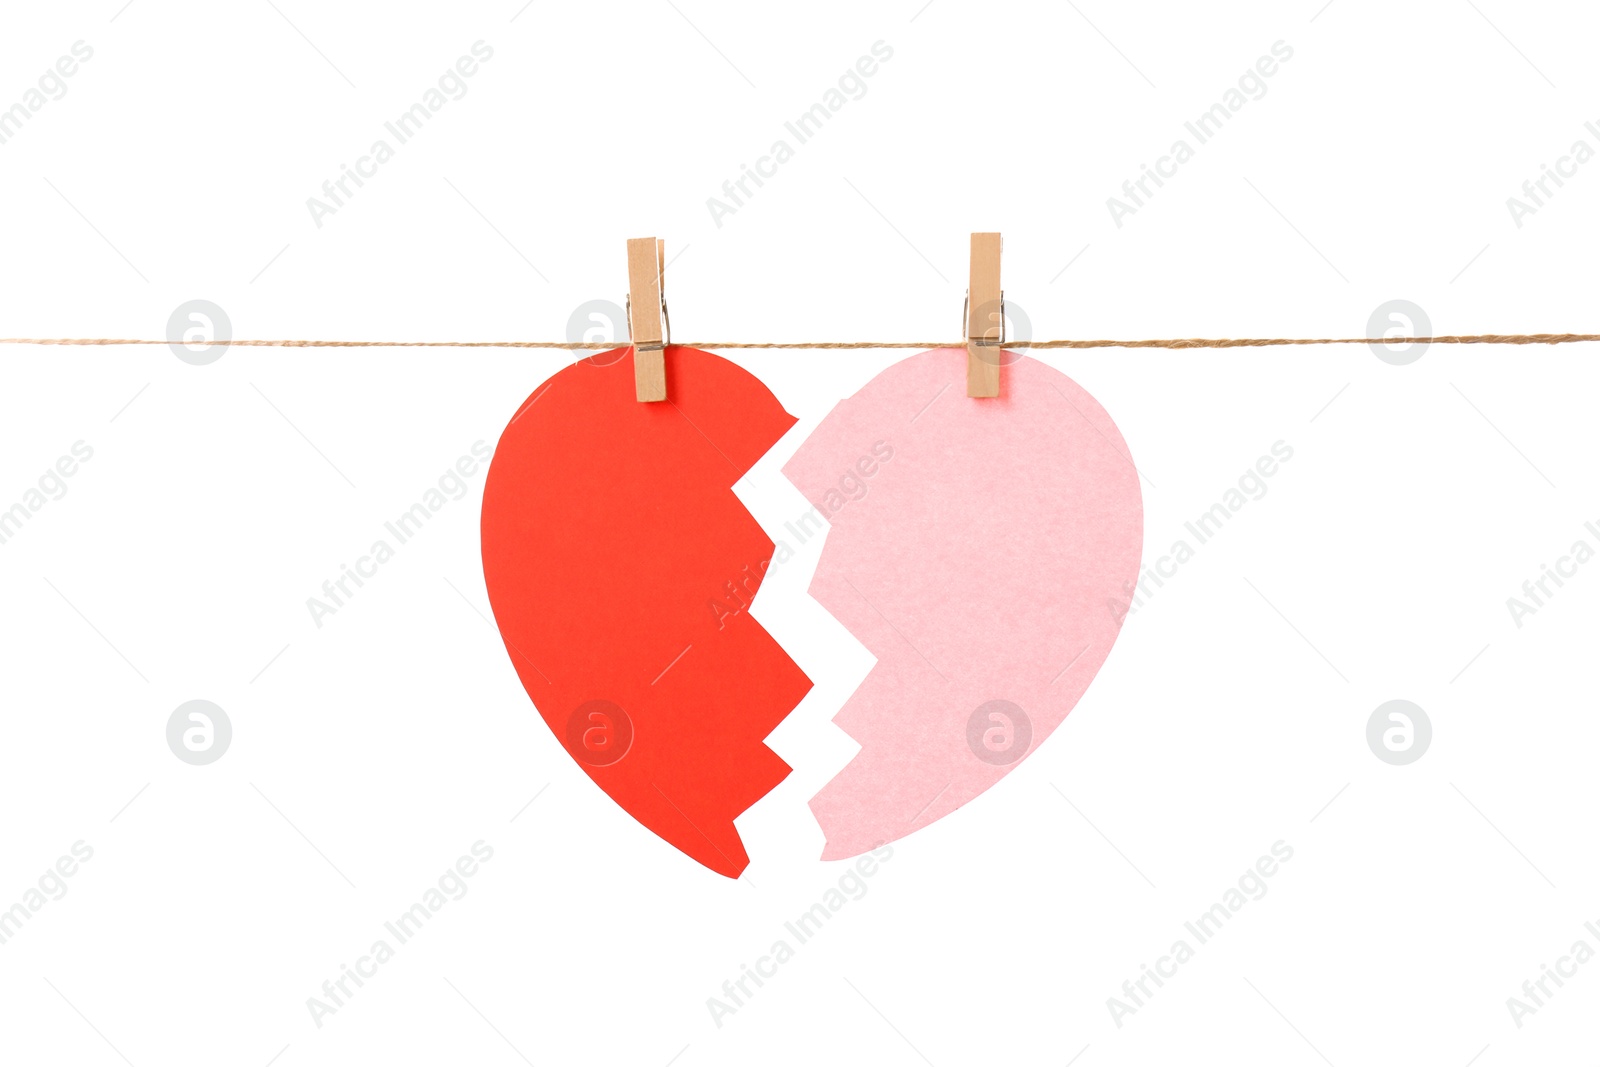 Photo of Halves of paper heart hanging on rope against white background. Relationship problems